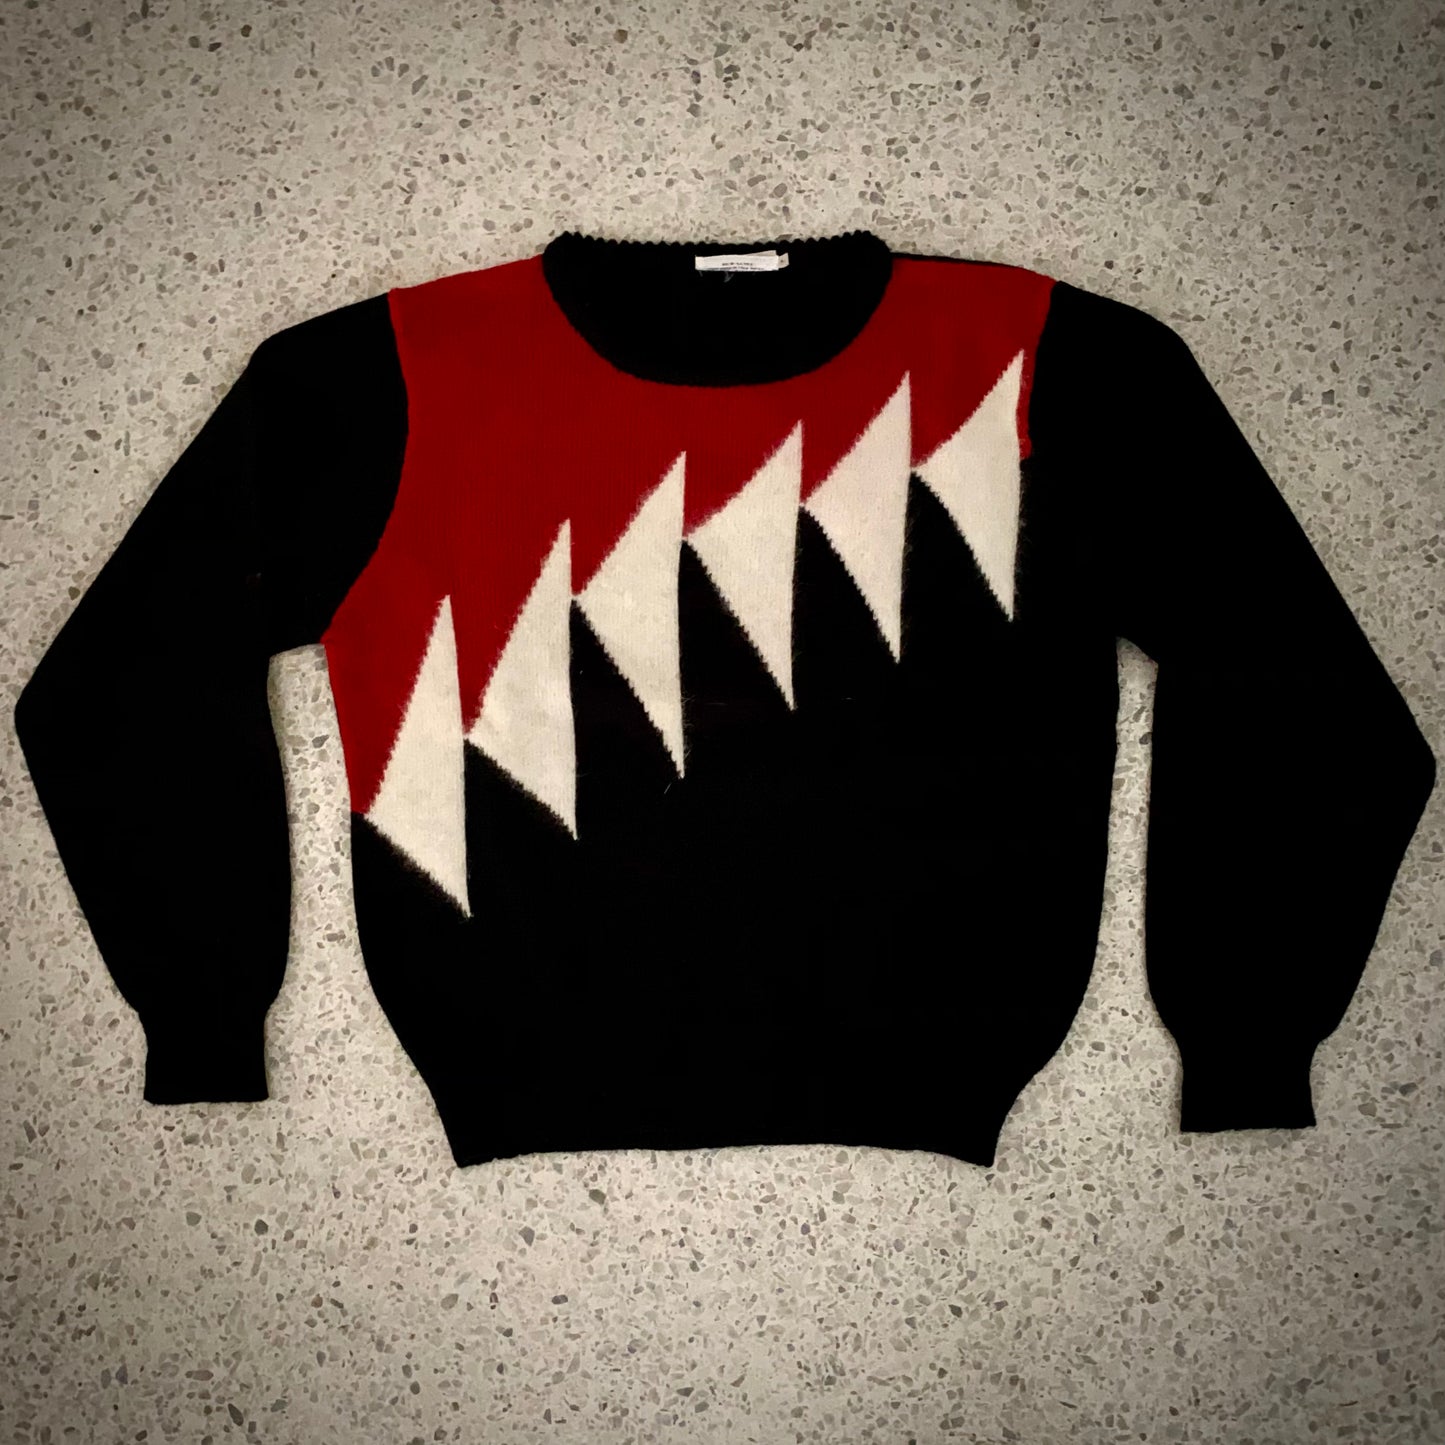 1980s Personal Sweater